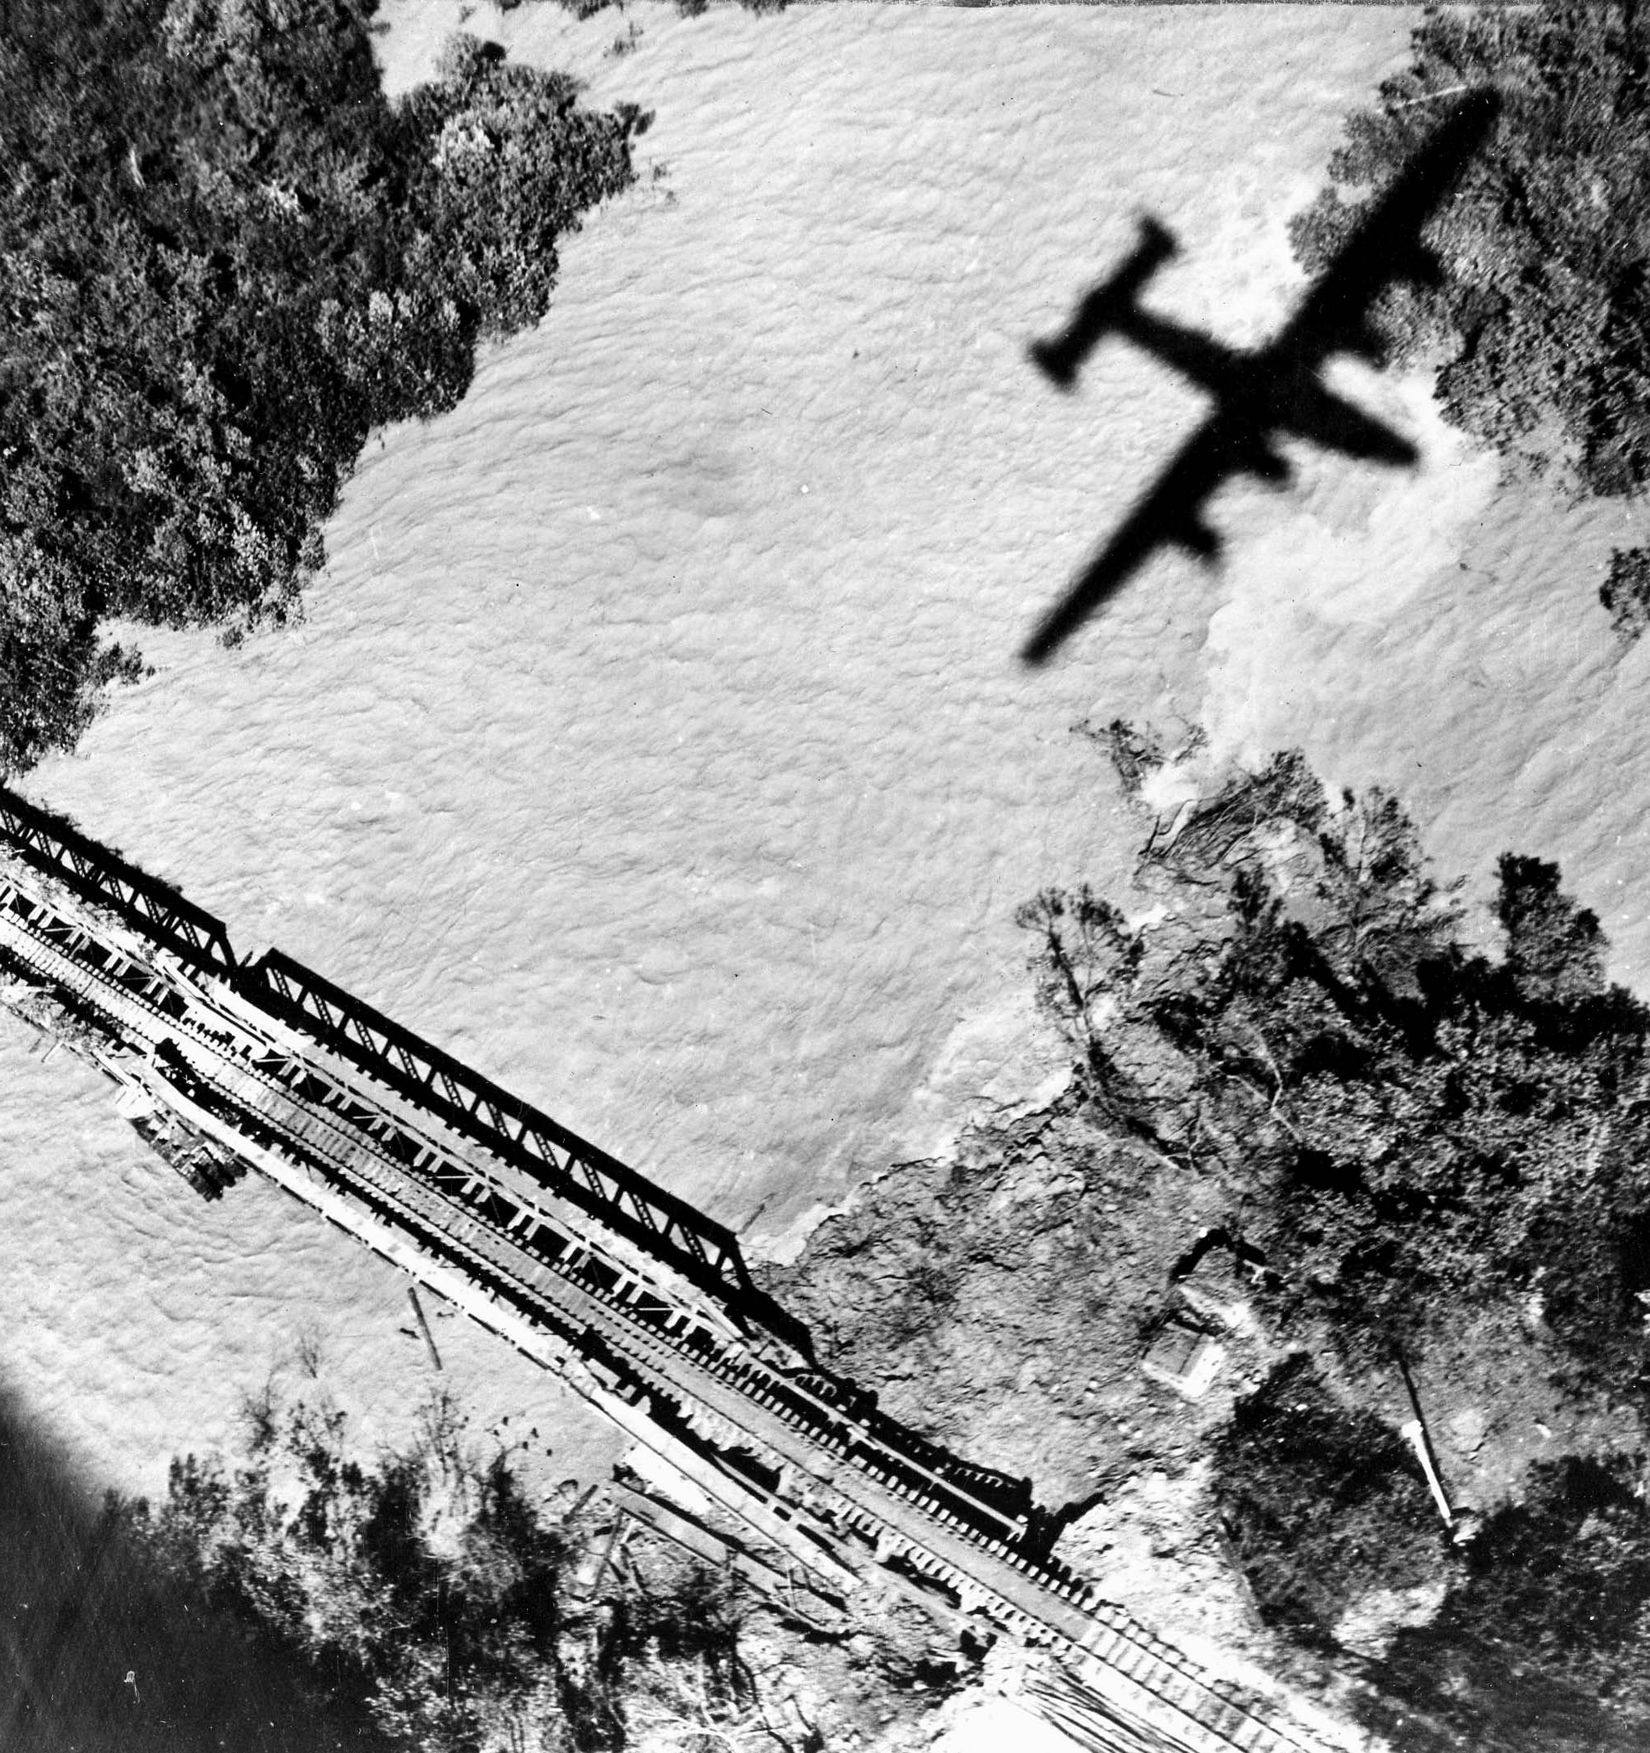 An American B-24 from the 7th Bombardment Group literally shadows a Japanese railroad bridge at Moulmein-Ye in January 1945. The bridge was one of three transporting enemy supplies to Burma.